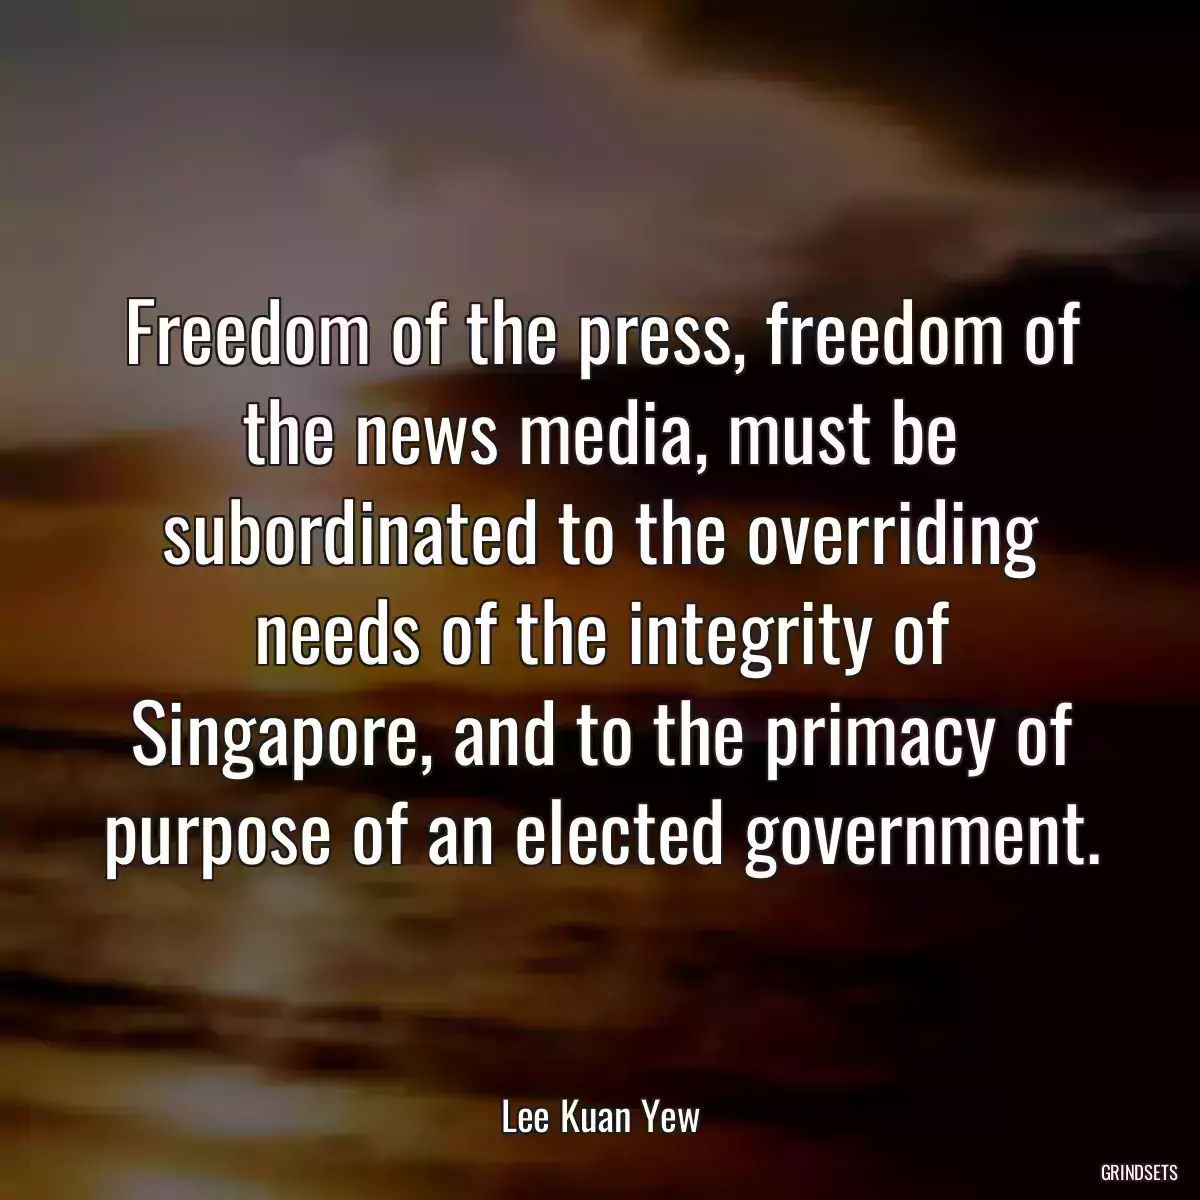 Freedom of the press, freedom of the news media, must be subordinated to the overriding needs of the integrity of Singapore, and to the primacy of purpose of an elected government.